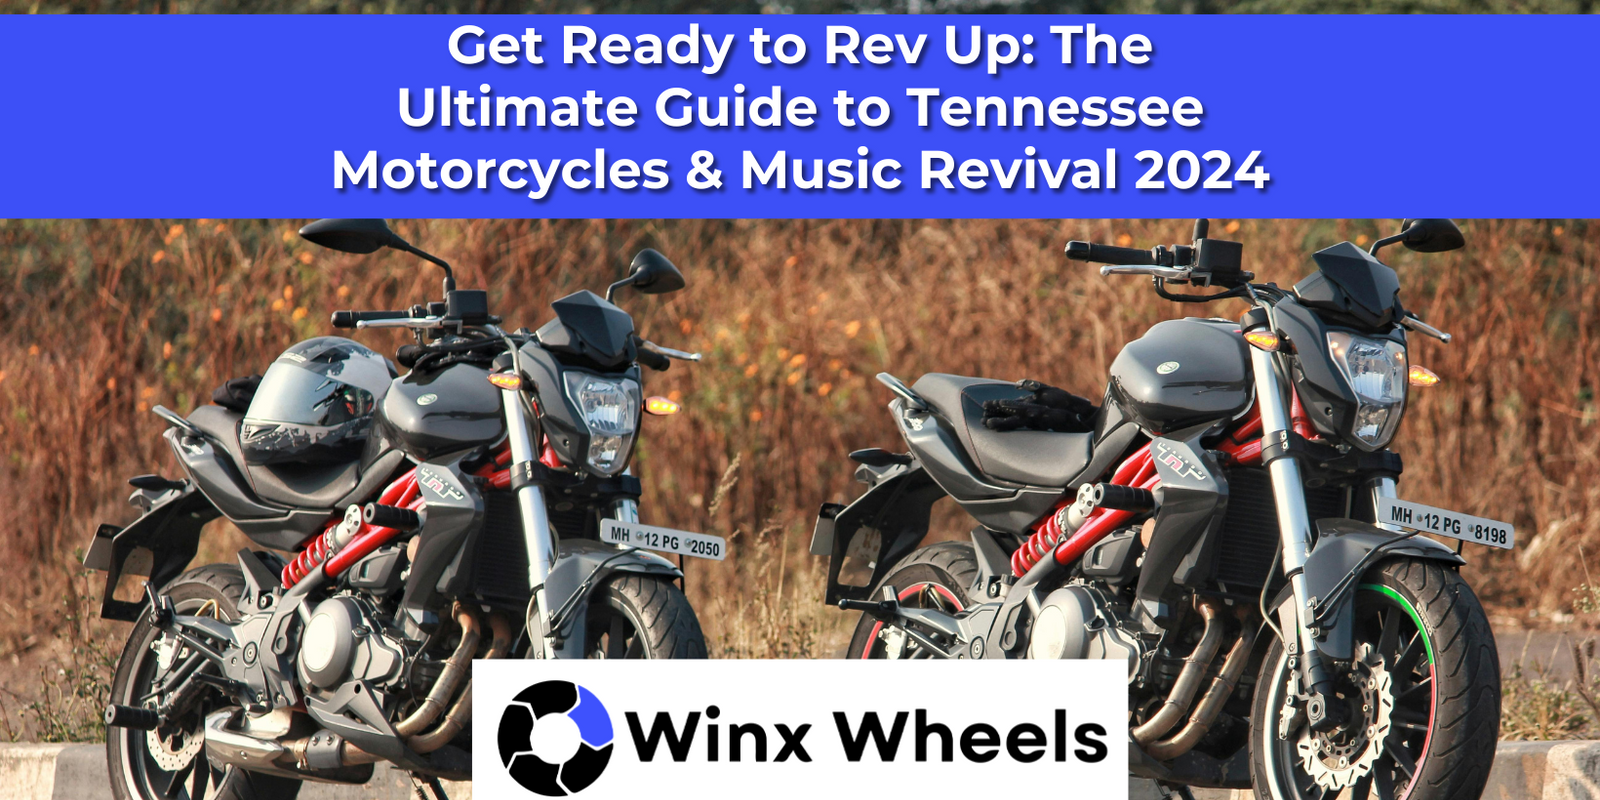 Get Ready to Rev Up: The Ultimate Guide to Tennessee Motorcycles & Music Revival 2024